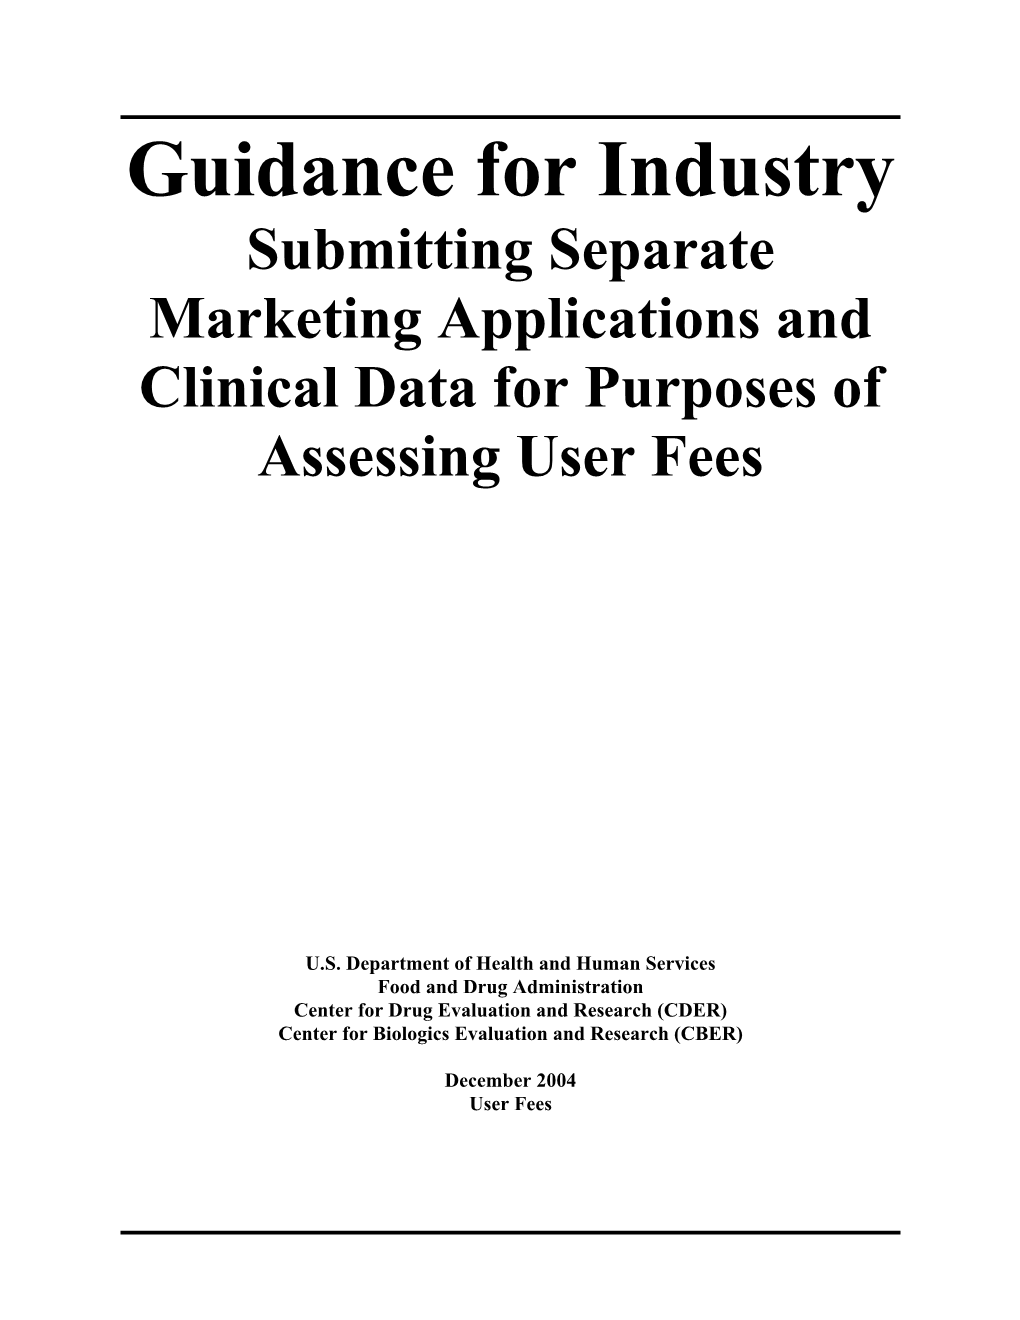 Guidance for Industry: Submitting Separate Marketing Applications